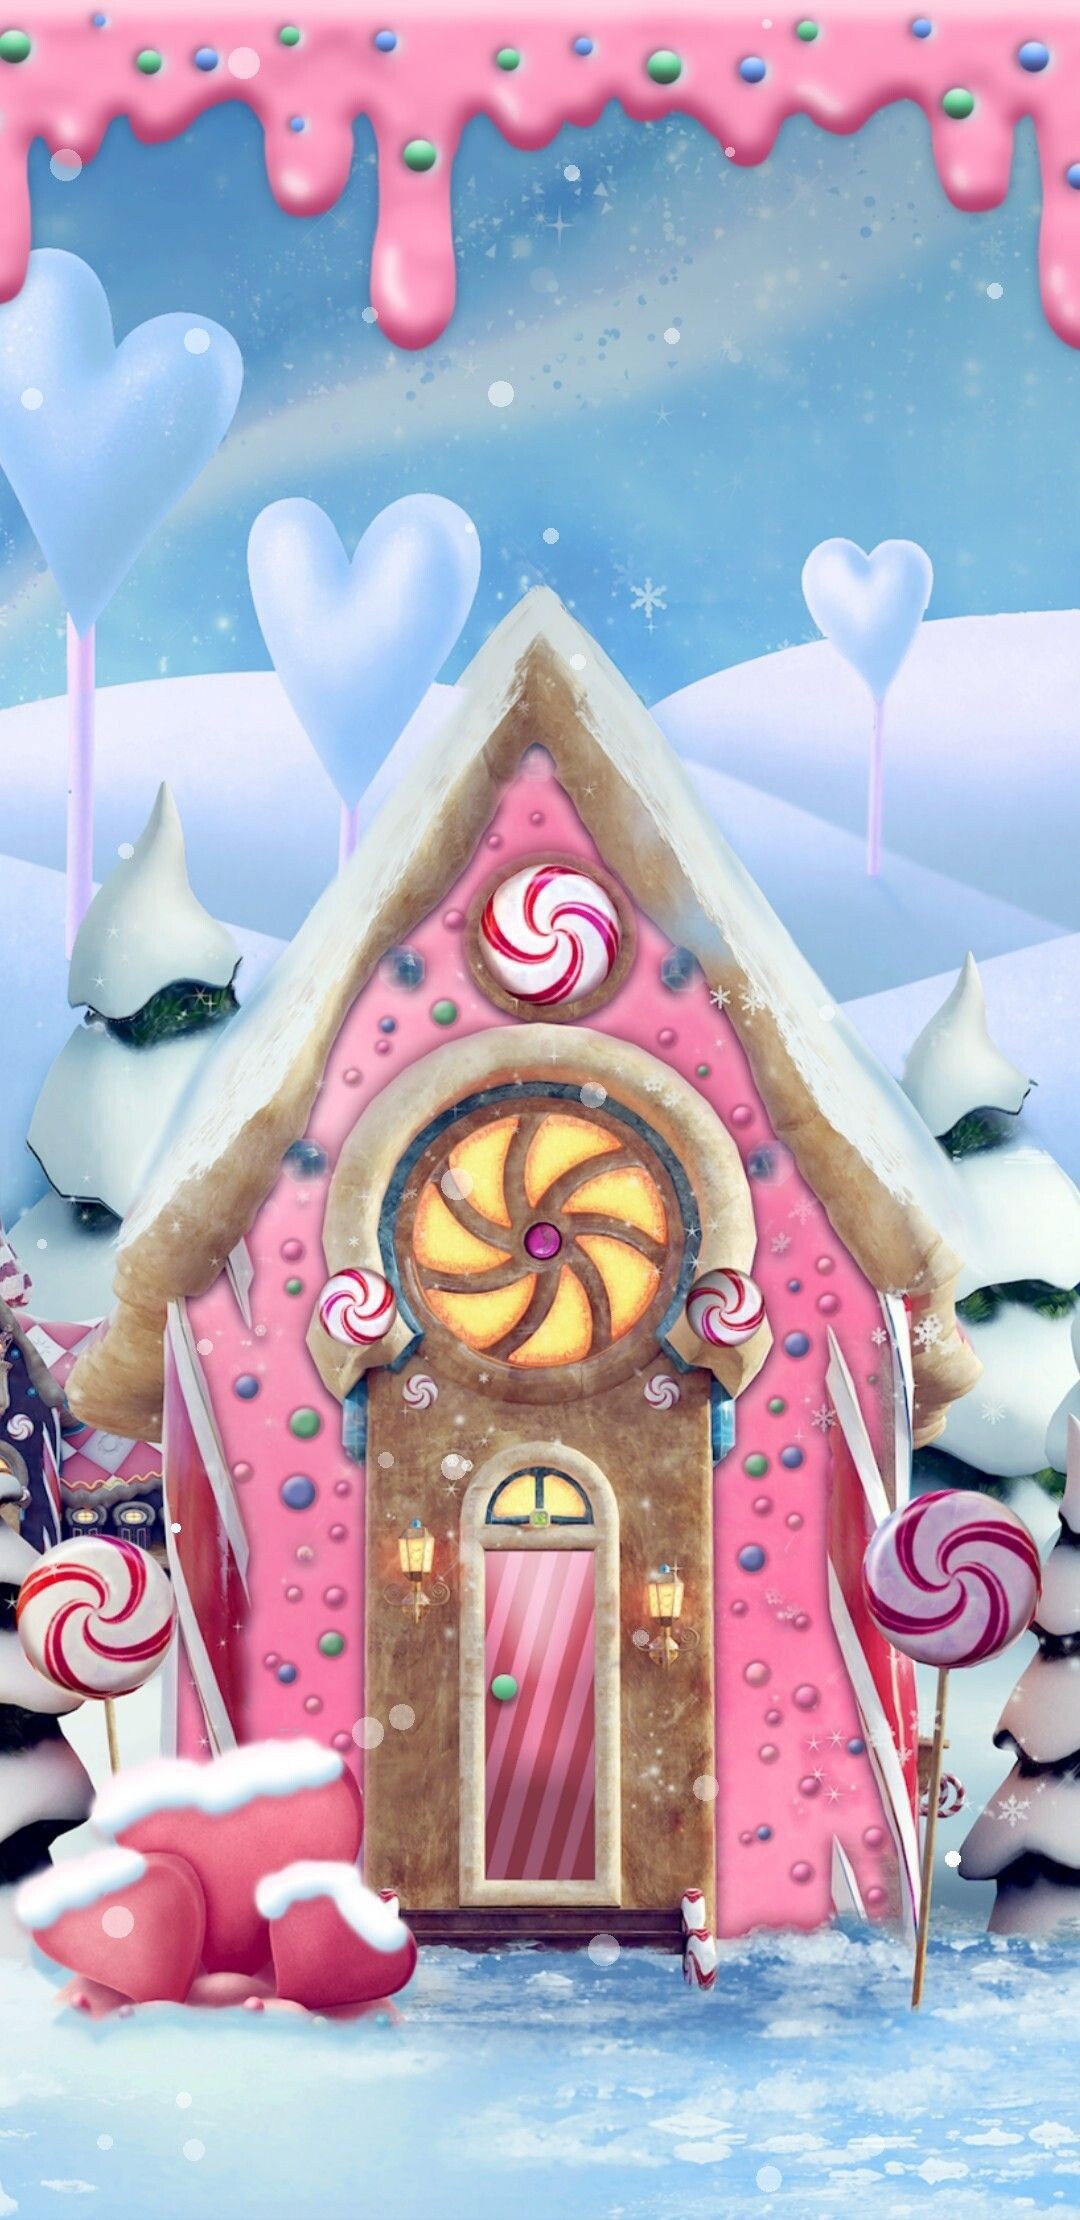 Gingerbread House: Candy house decorated with pink coating, Winter wonderland, Sweet treats. 1080x2220 HD Wallpaper.